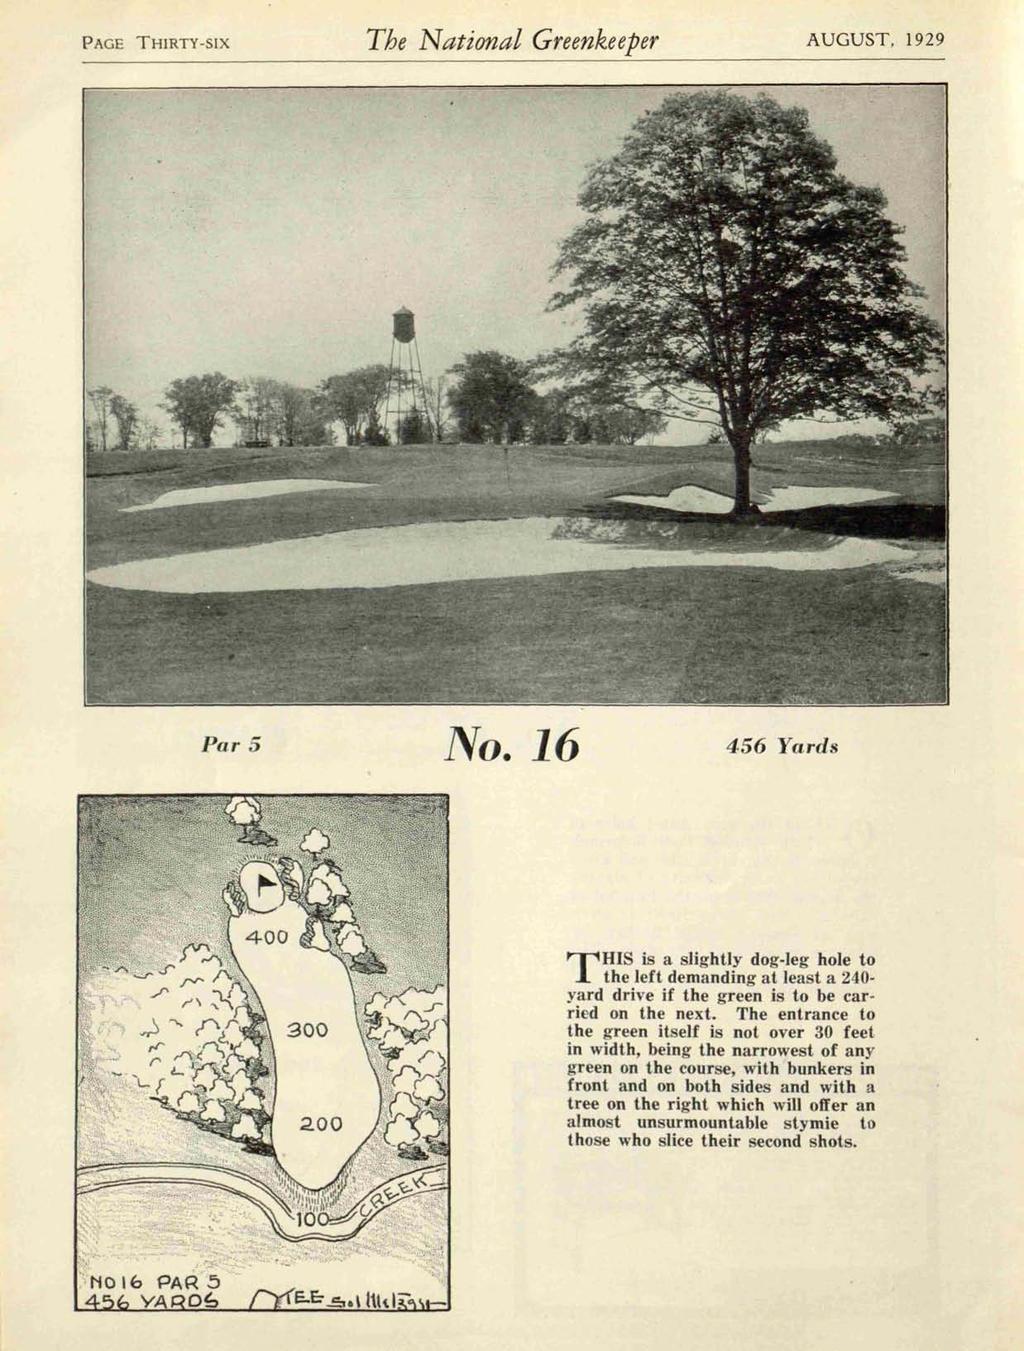 P AGE THIRTY -SIX The National Greenkeeper AUGUST, 1929 Par 5 No.